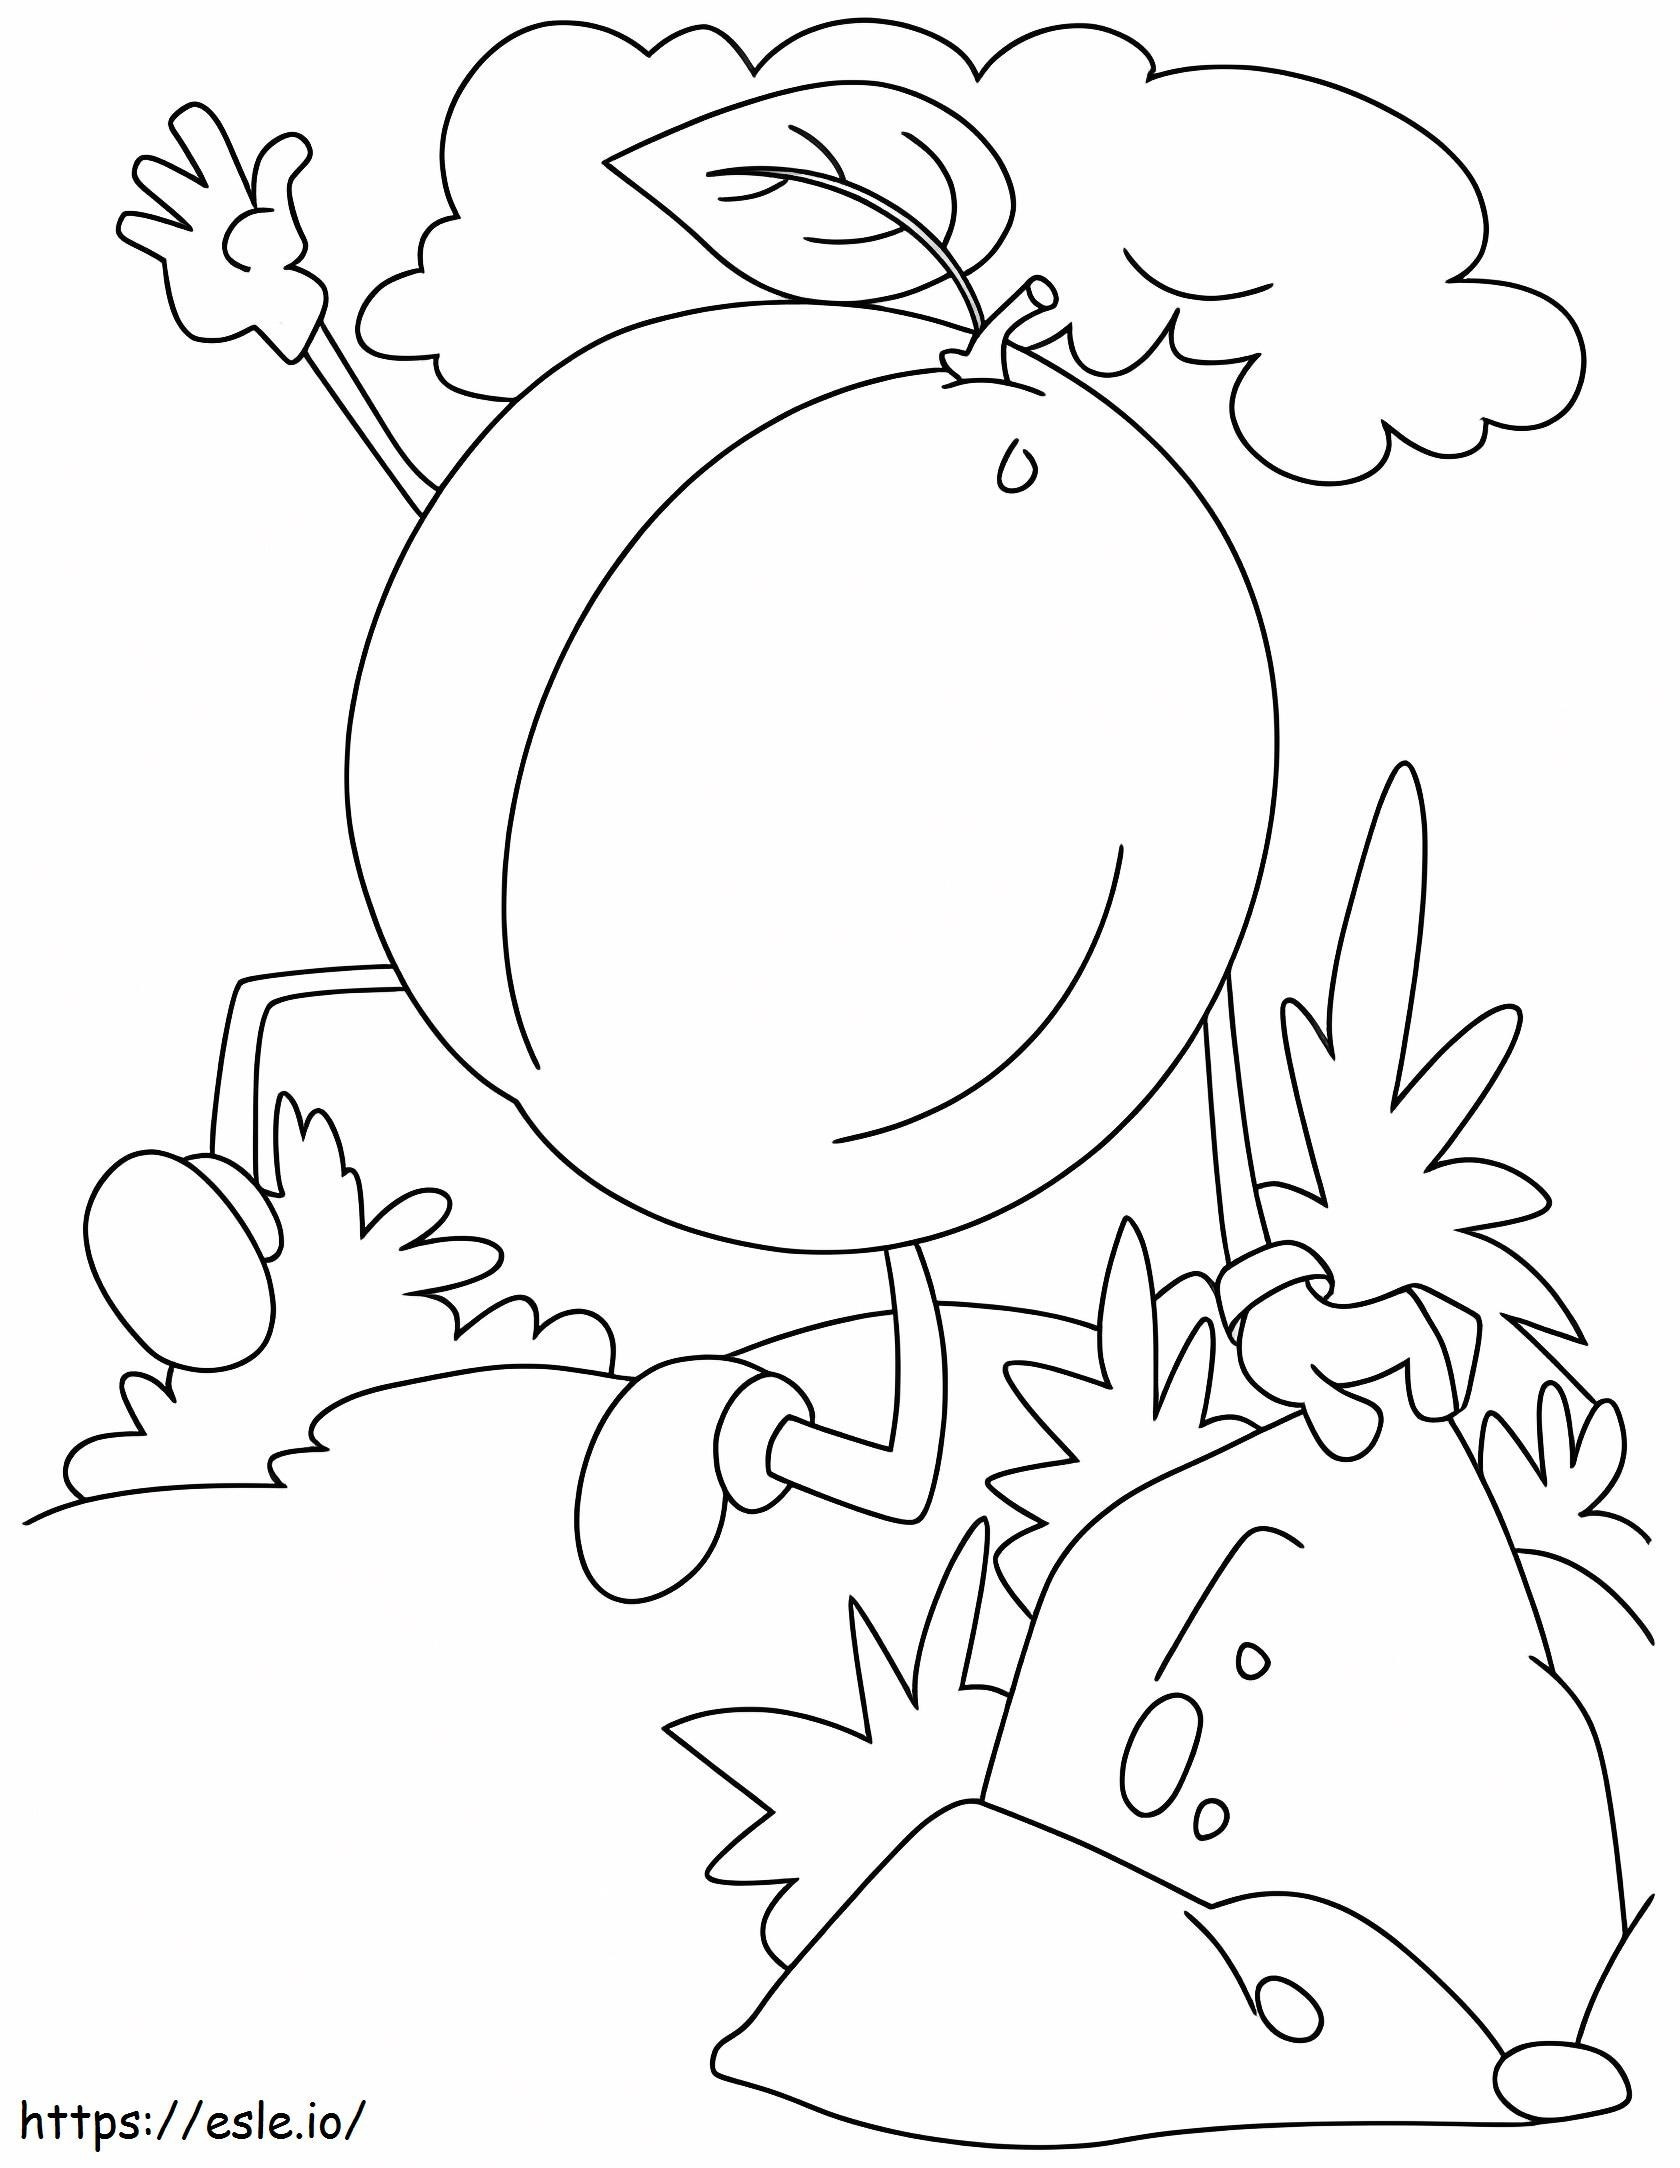 Apricot Running coloring page